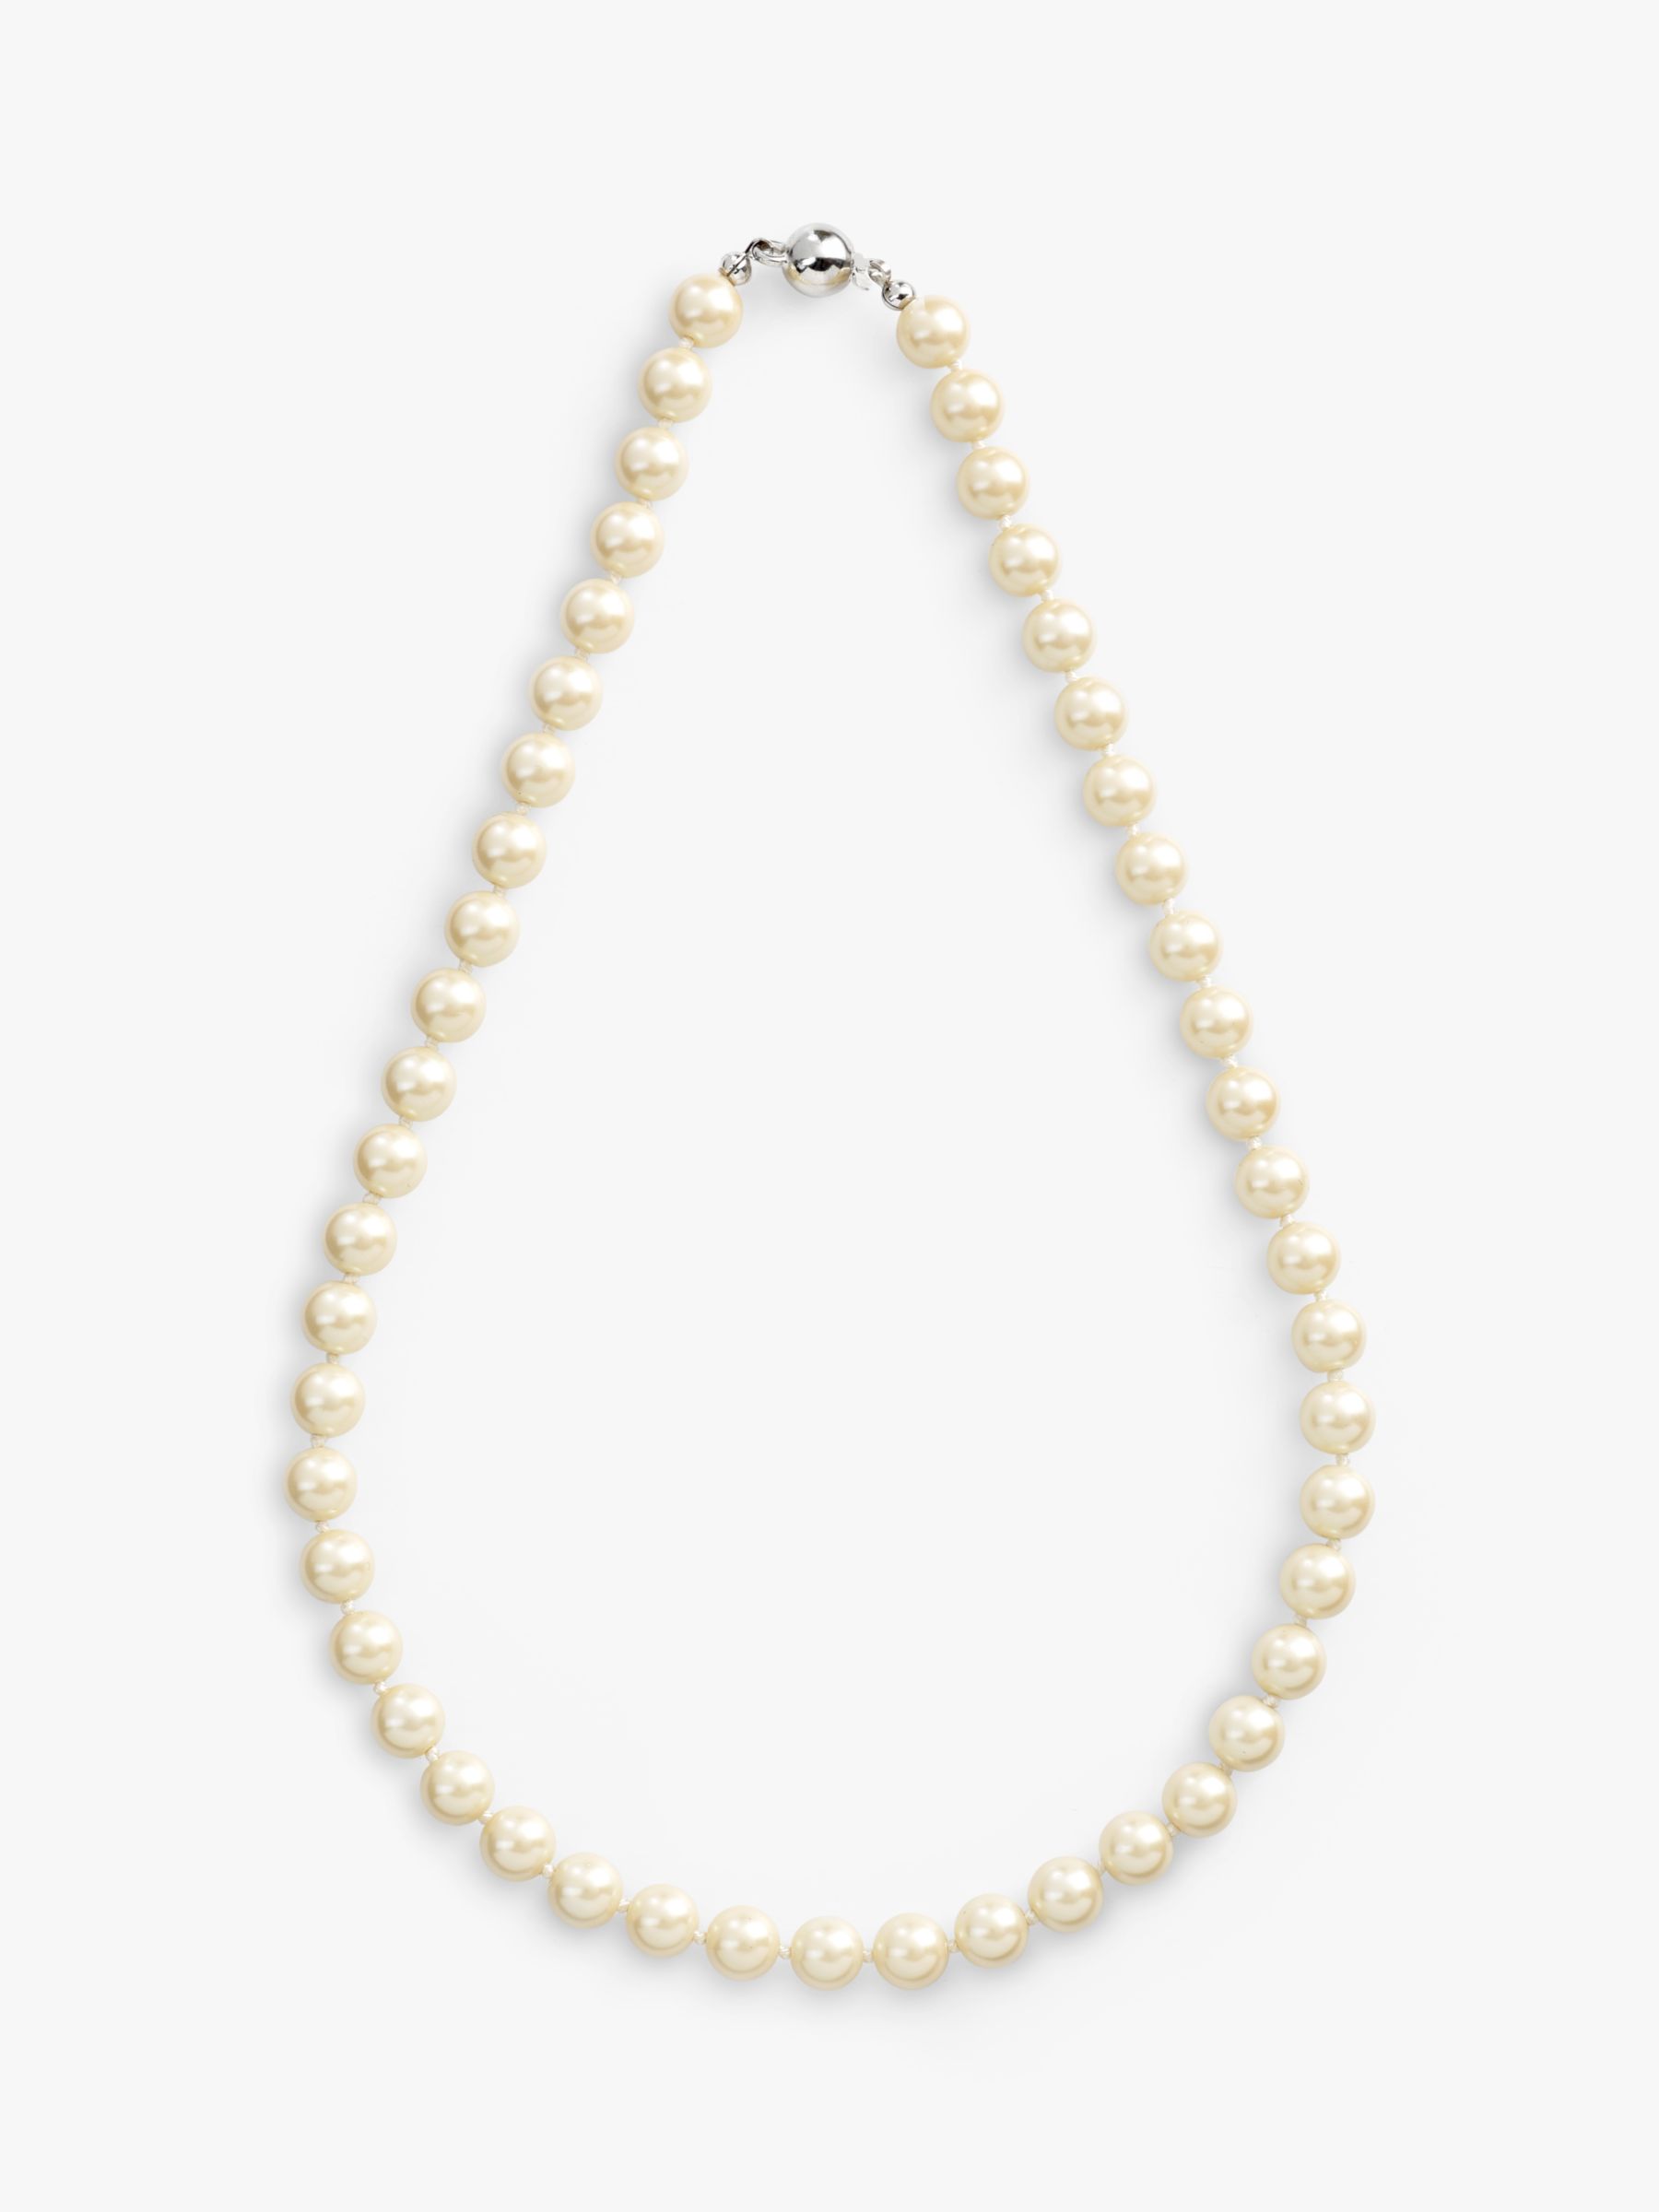 Buy Eclectica Vintage Single Row Faux Pearl Necklace Online at johnlewis.com